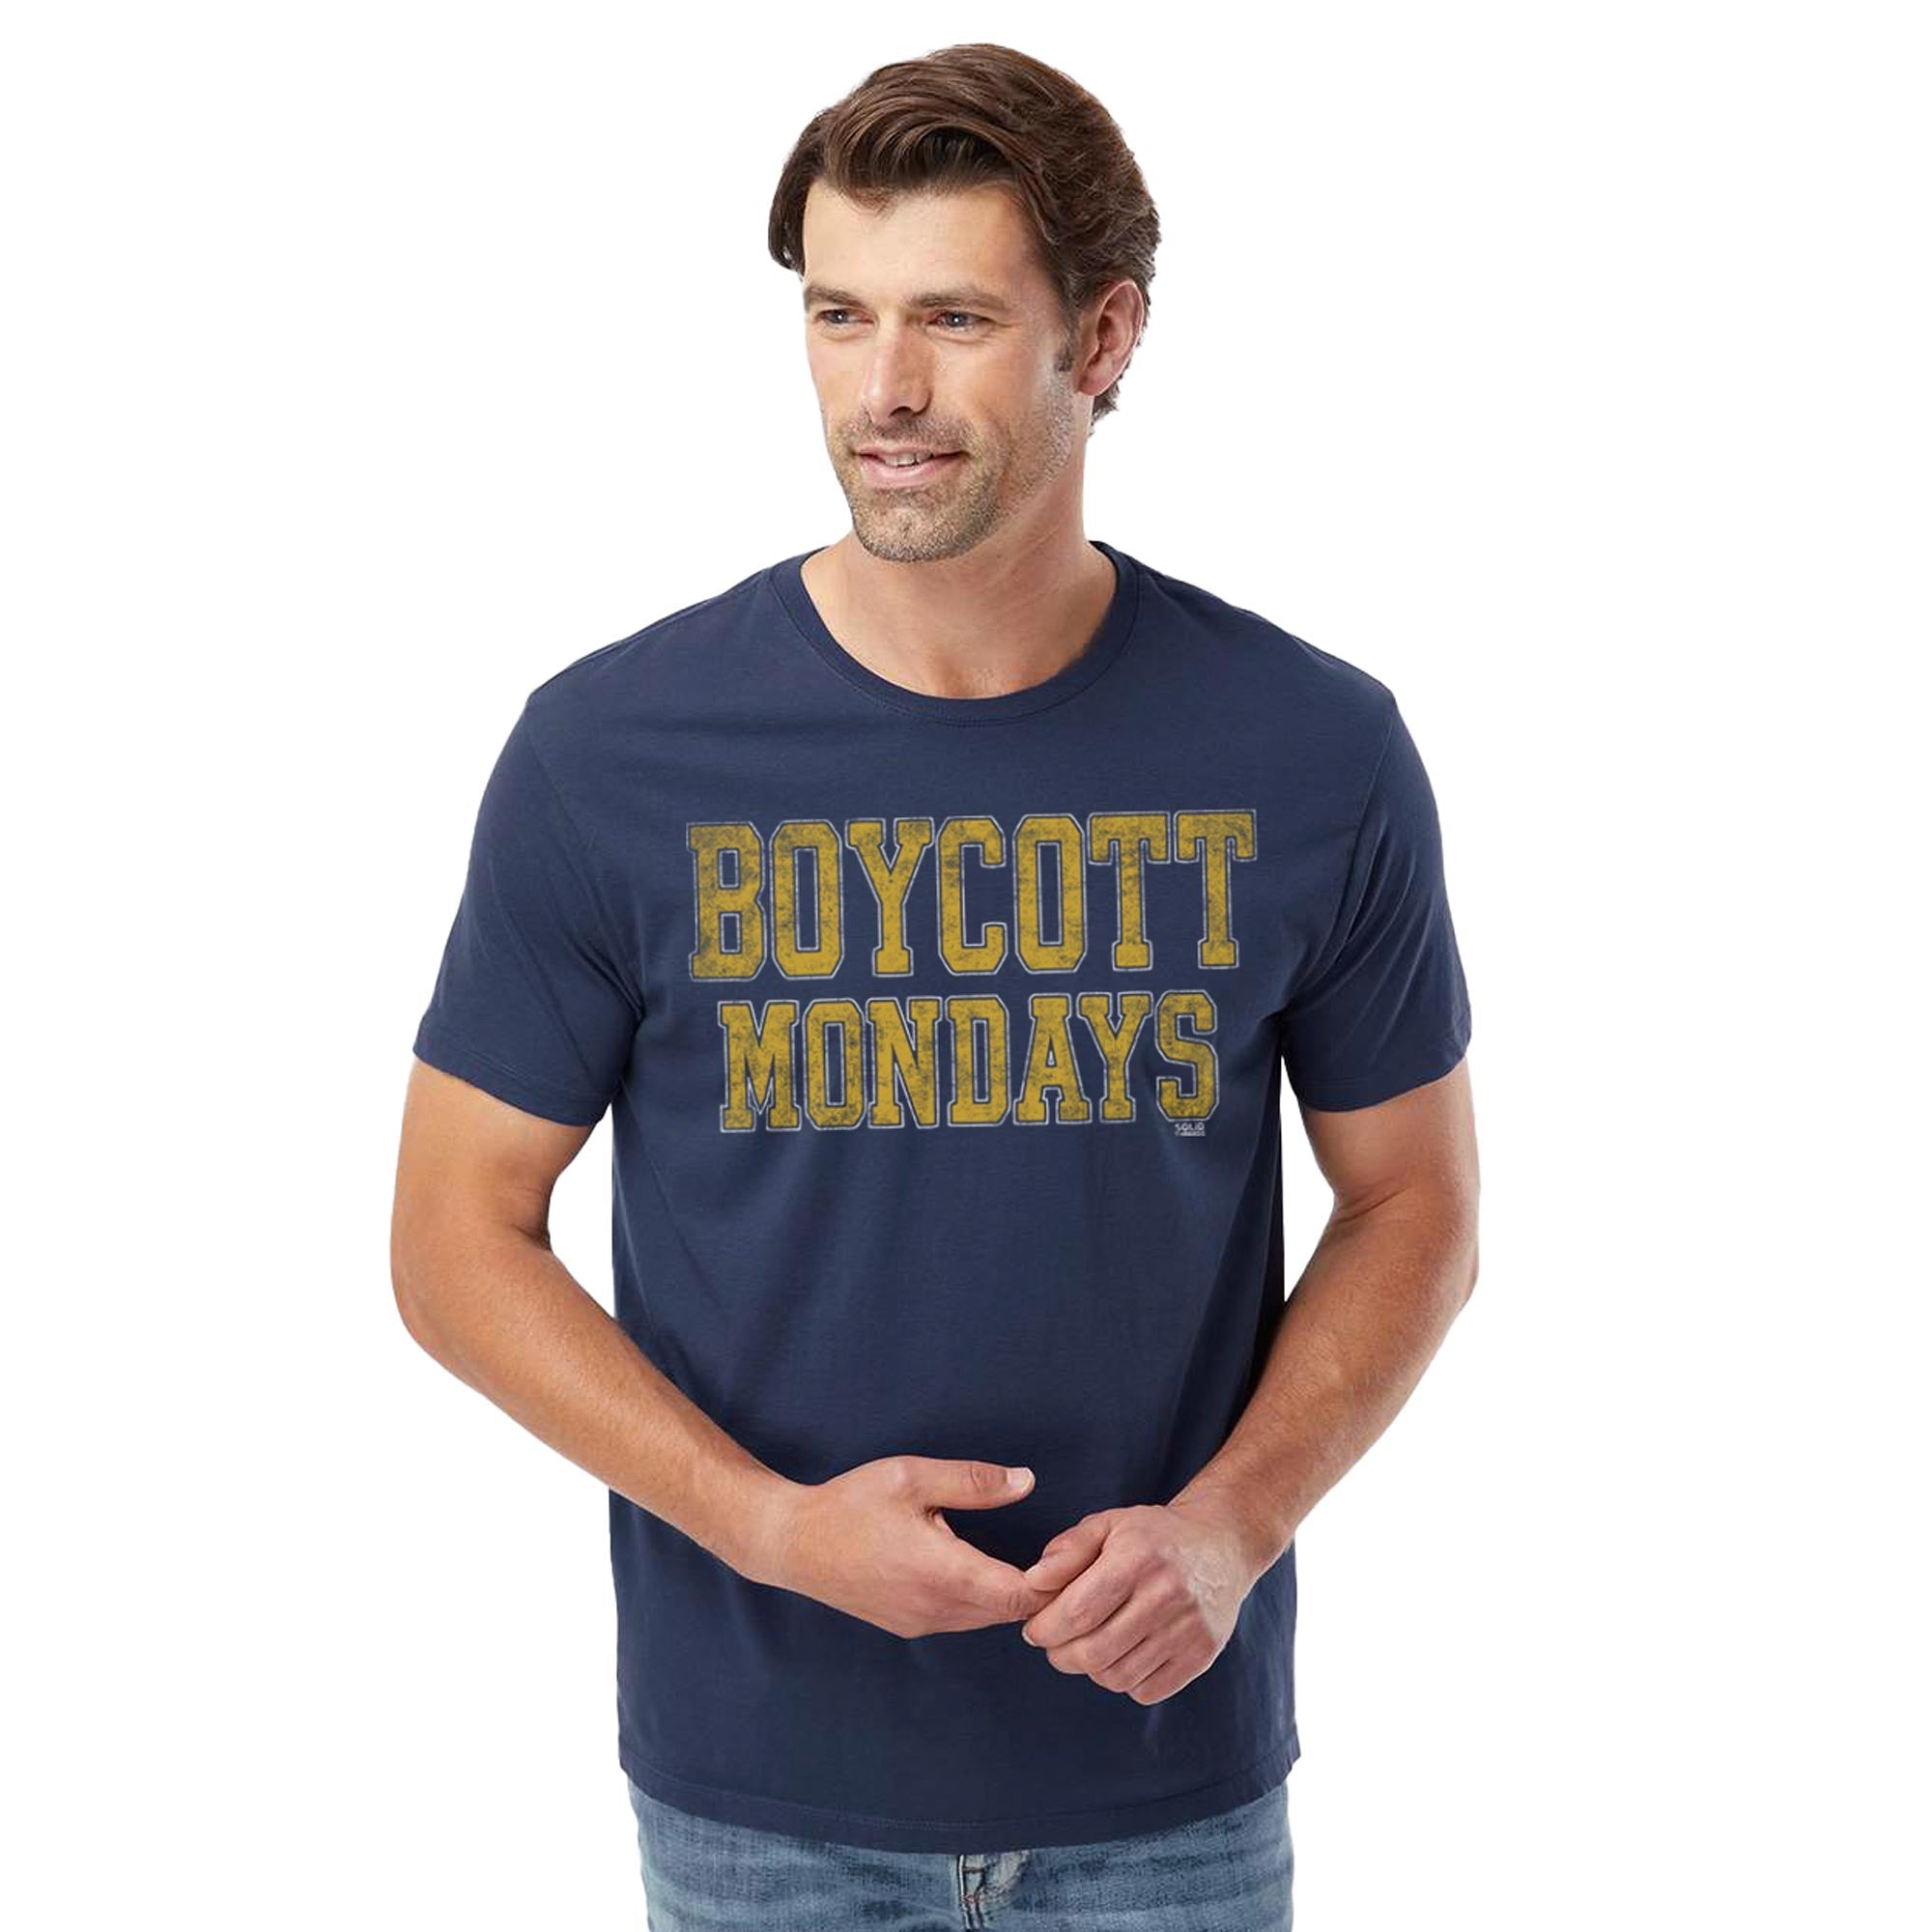 Boycott Mondays Vintage Organic Cotton T-shirt | Funny Weekend Party  Tee | Solid Threads